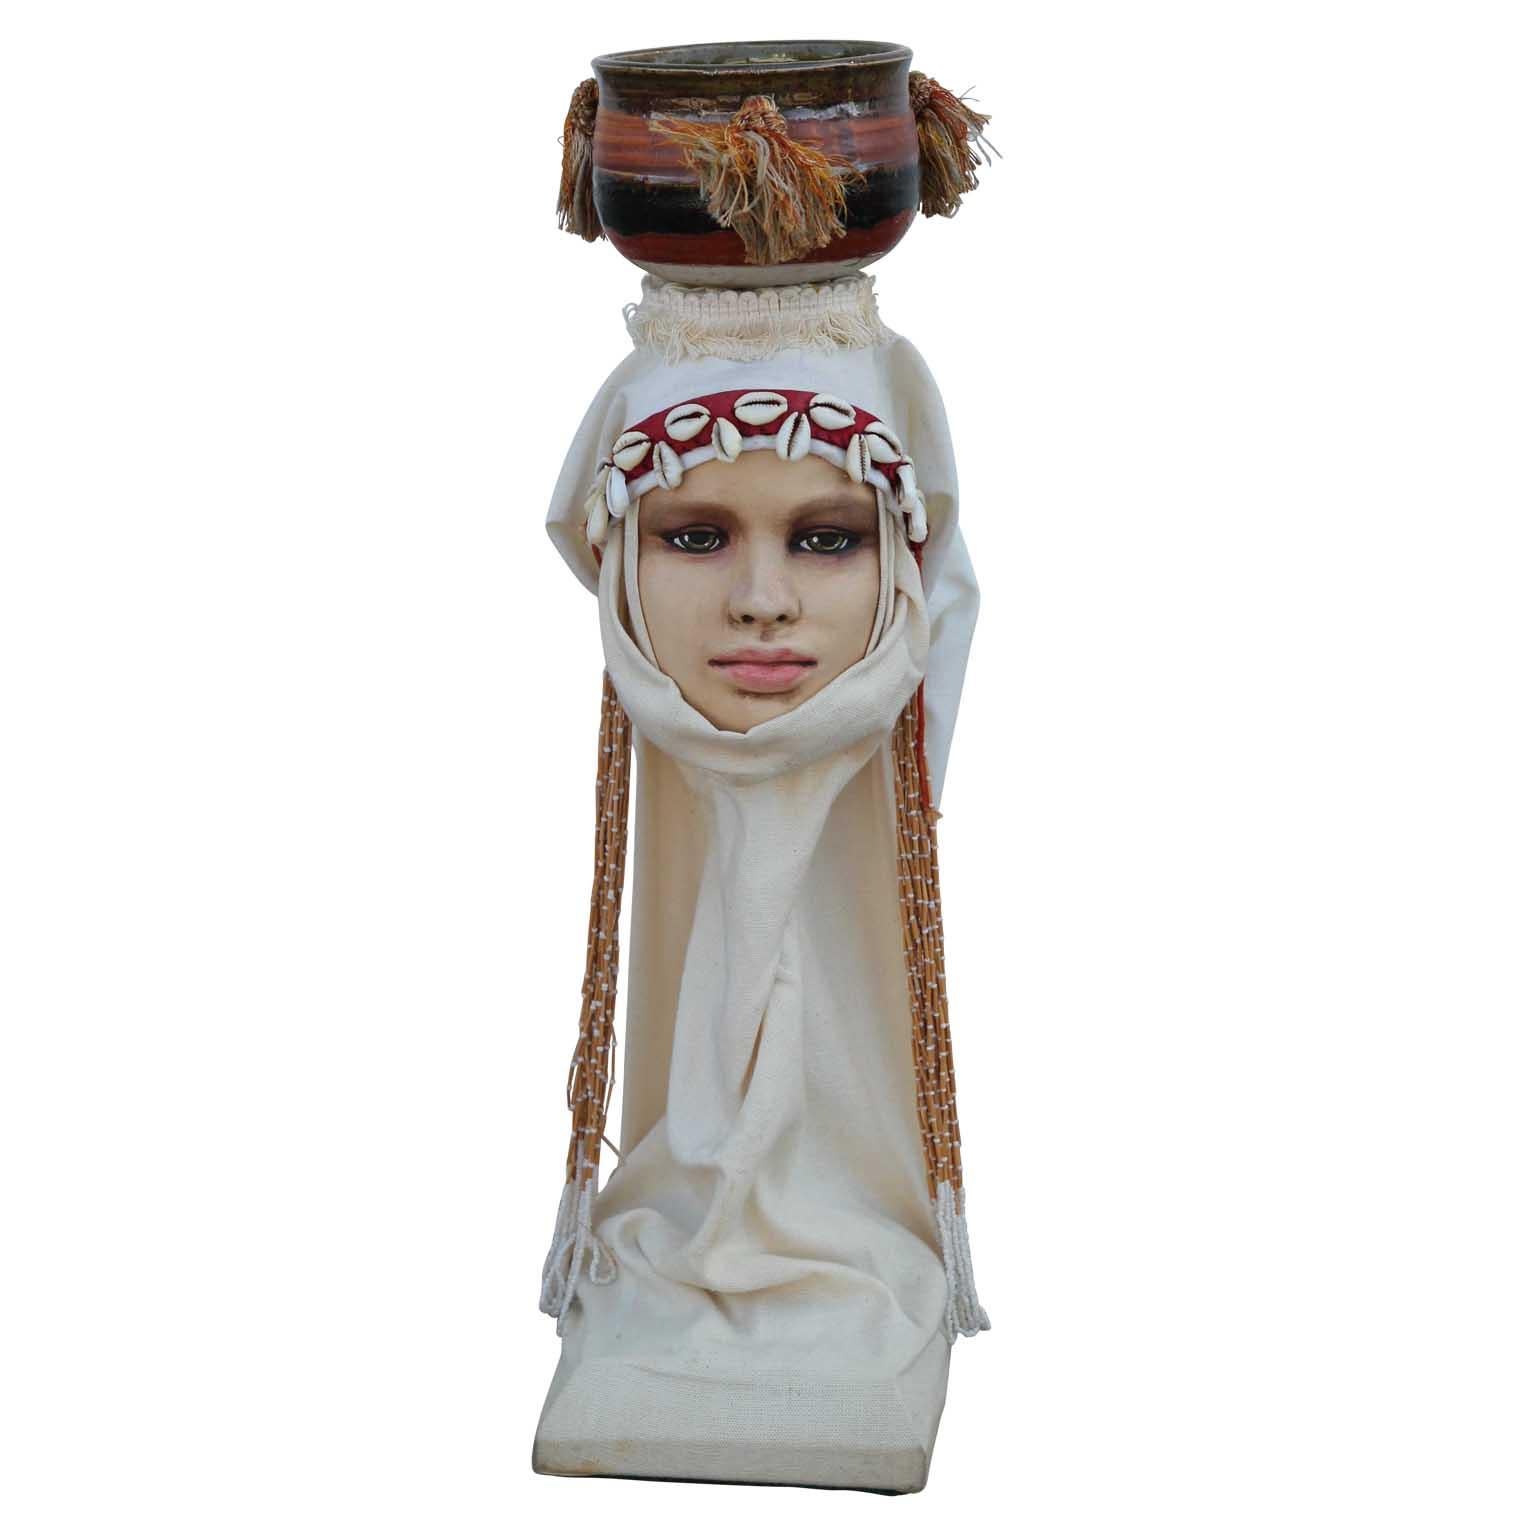 Wesley F. Walberg Figurative Sculpture - Mixed Media Sculpture of Female with Ceramic Pot on Head 